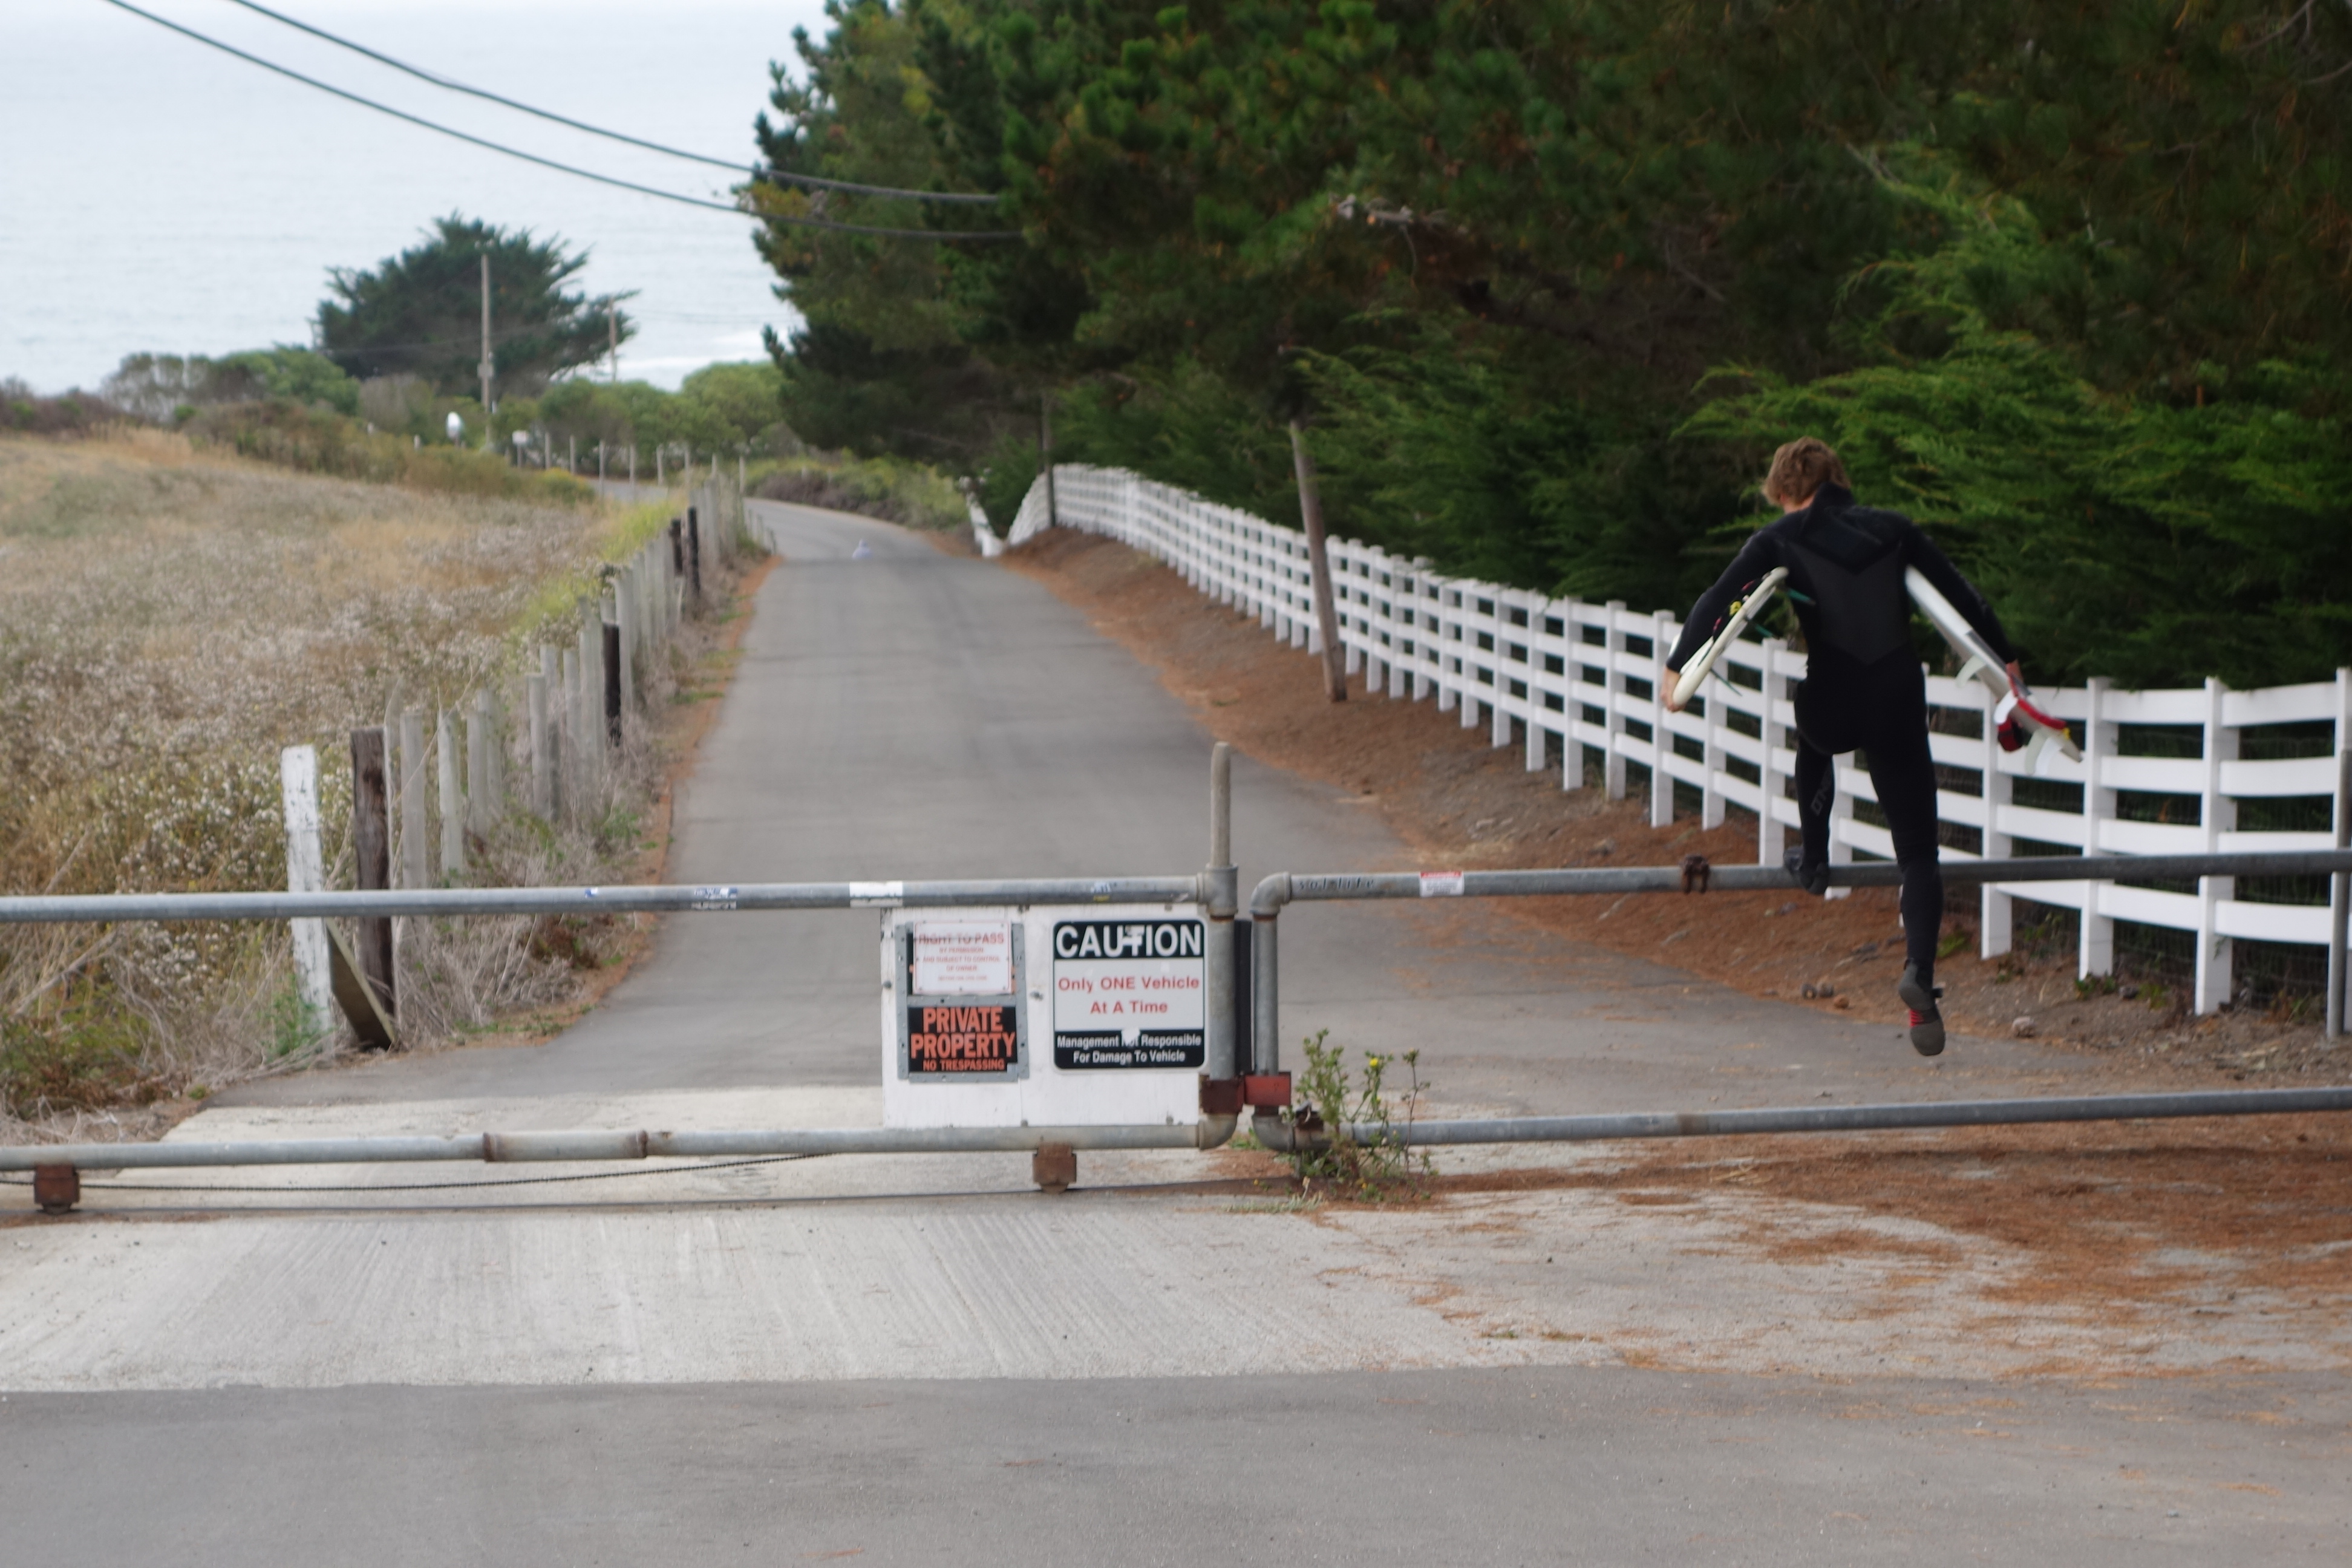 A surfer hops the gate at the top of Martins Beach Road, crossing property owned by venture capitalist Vinod Khosla in order to get to Martins Beach on August 7, 2014. (Katy Steinmetz for TIME)